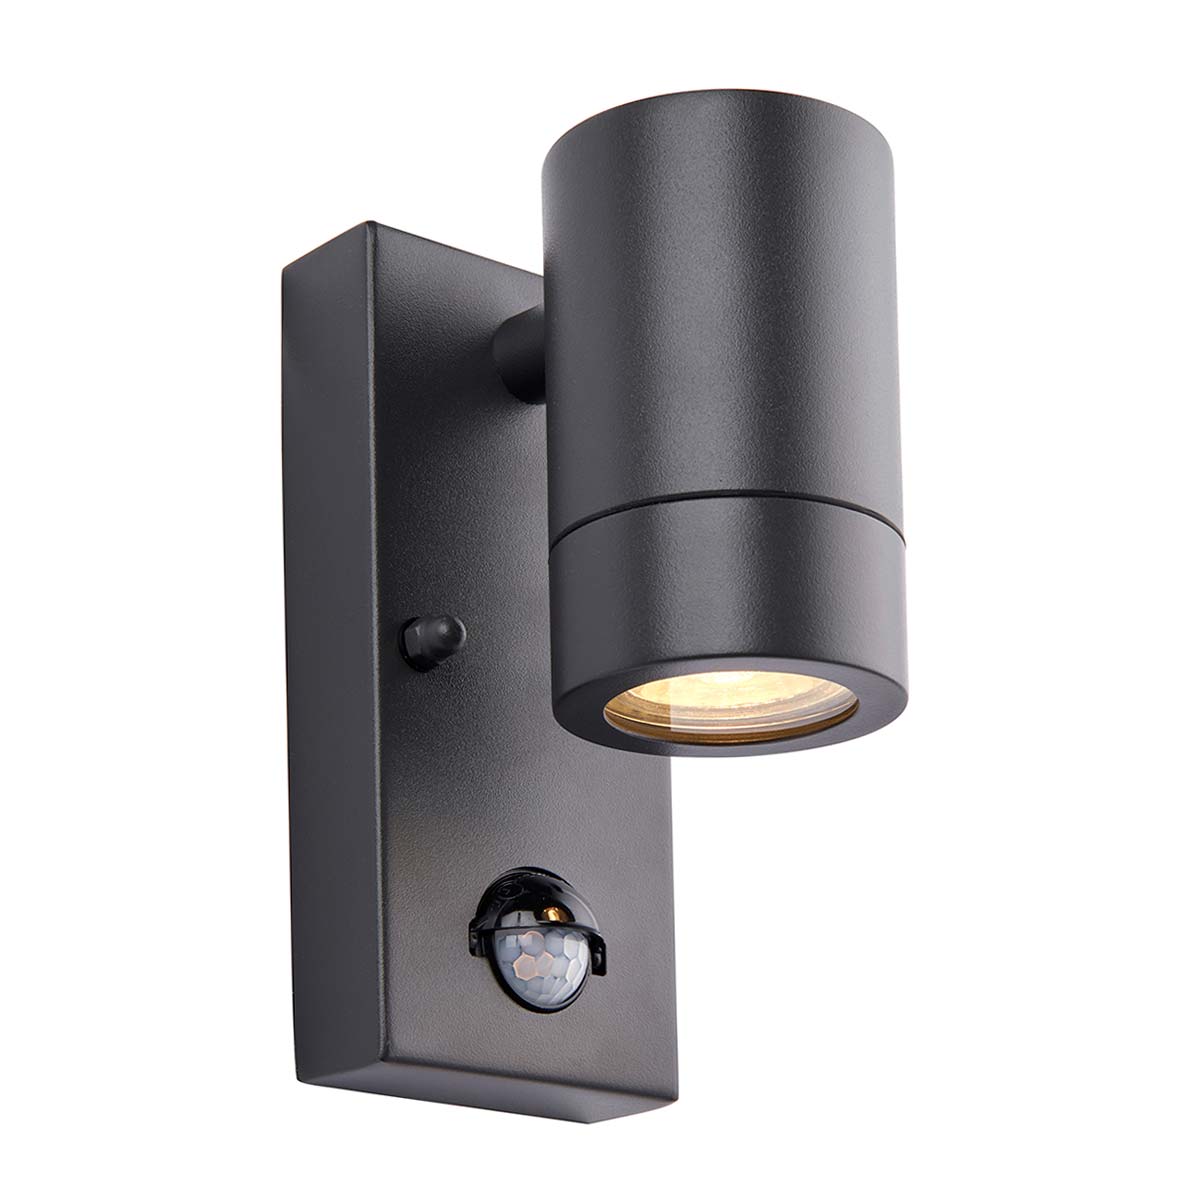 Palin 1 Light PIR Wall Light With Override Anthracite